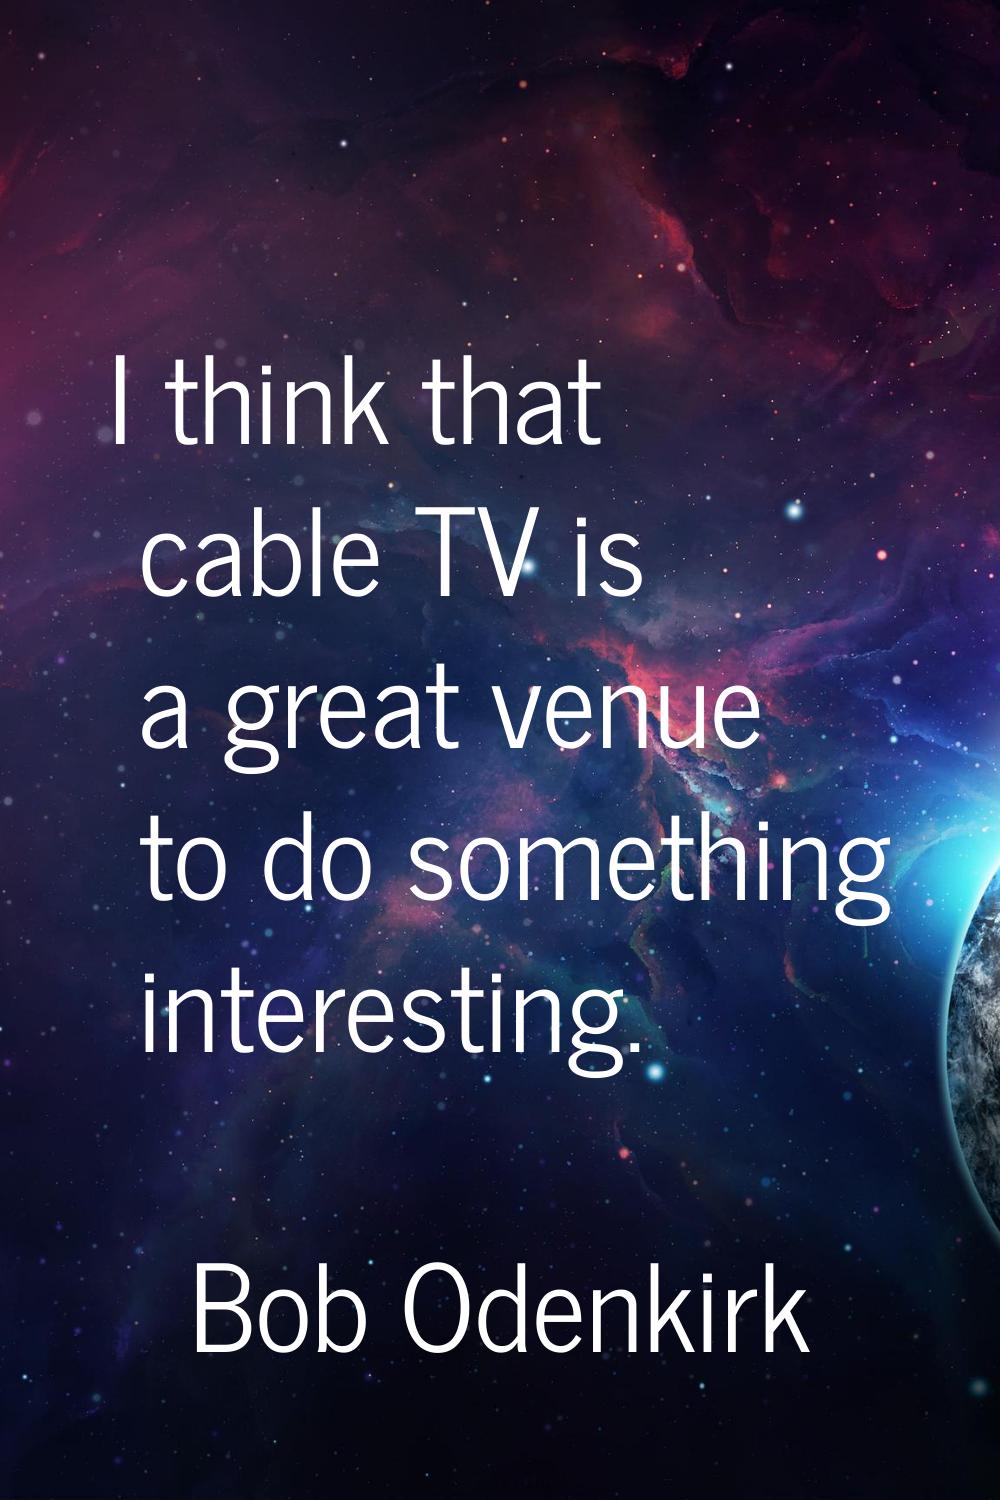 I think that cable TV is a great venue to do something interesting.